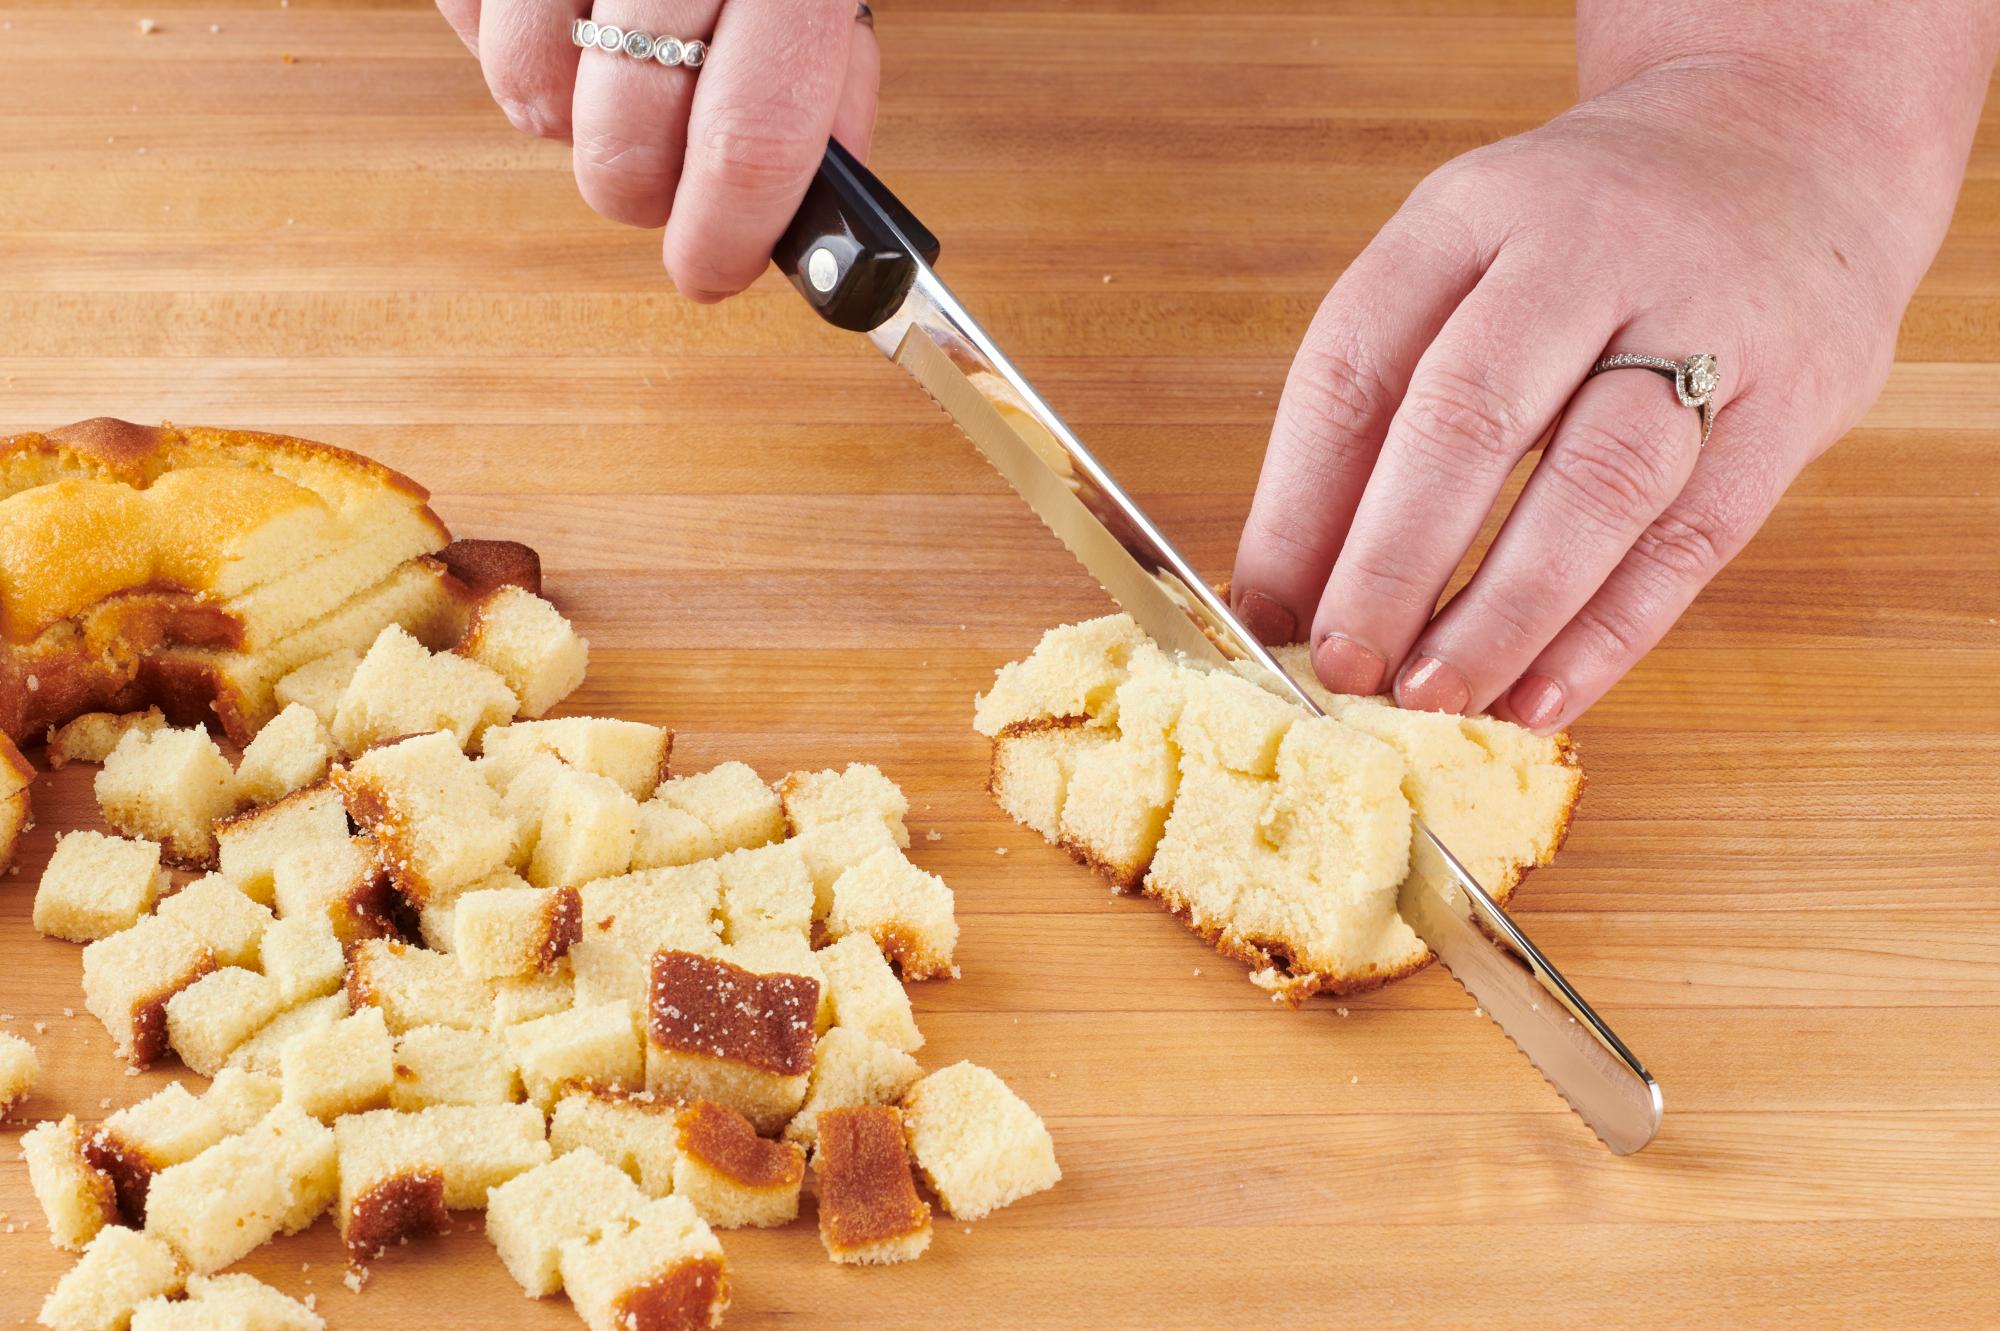 Slicing the pound cake into cubes with a Petite Slicer.